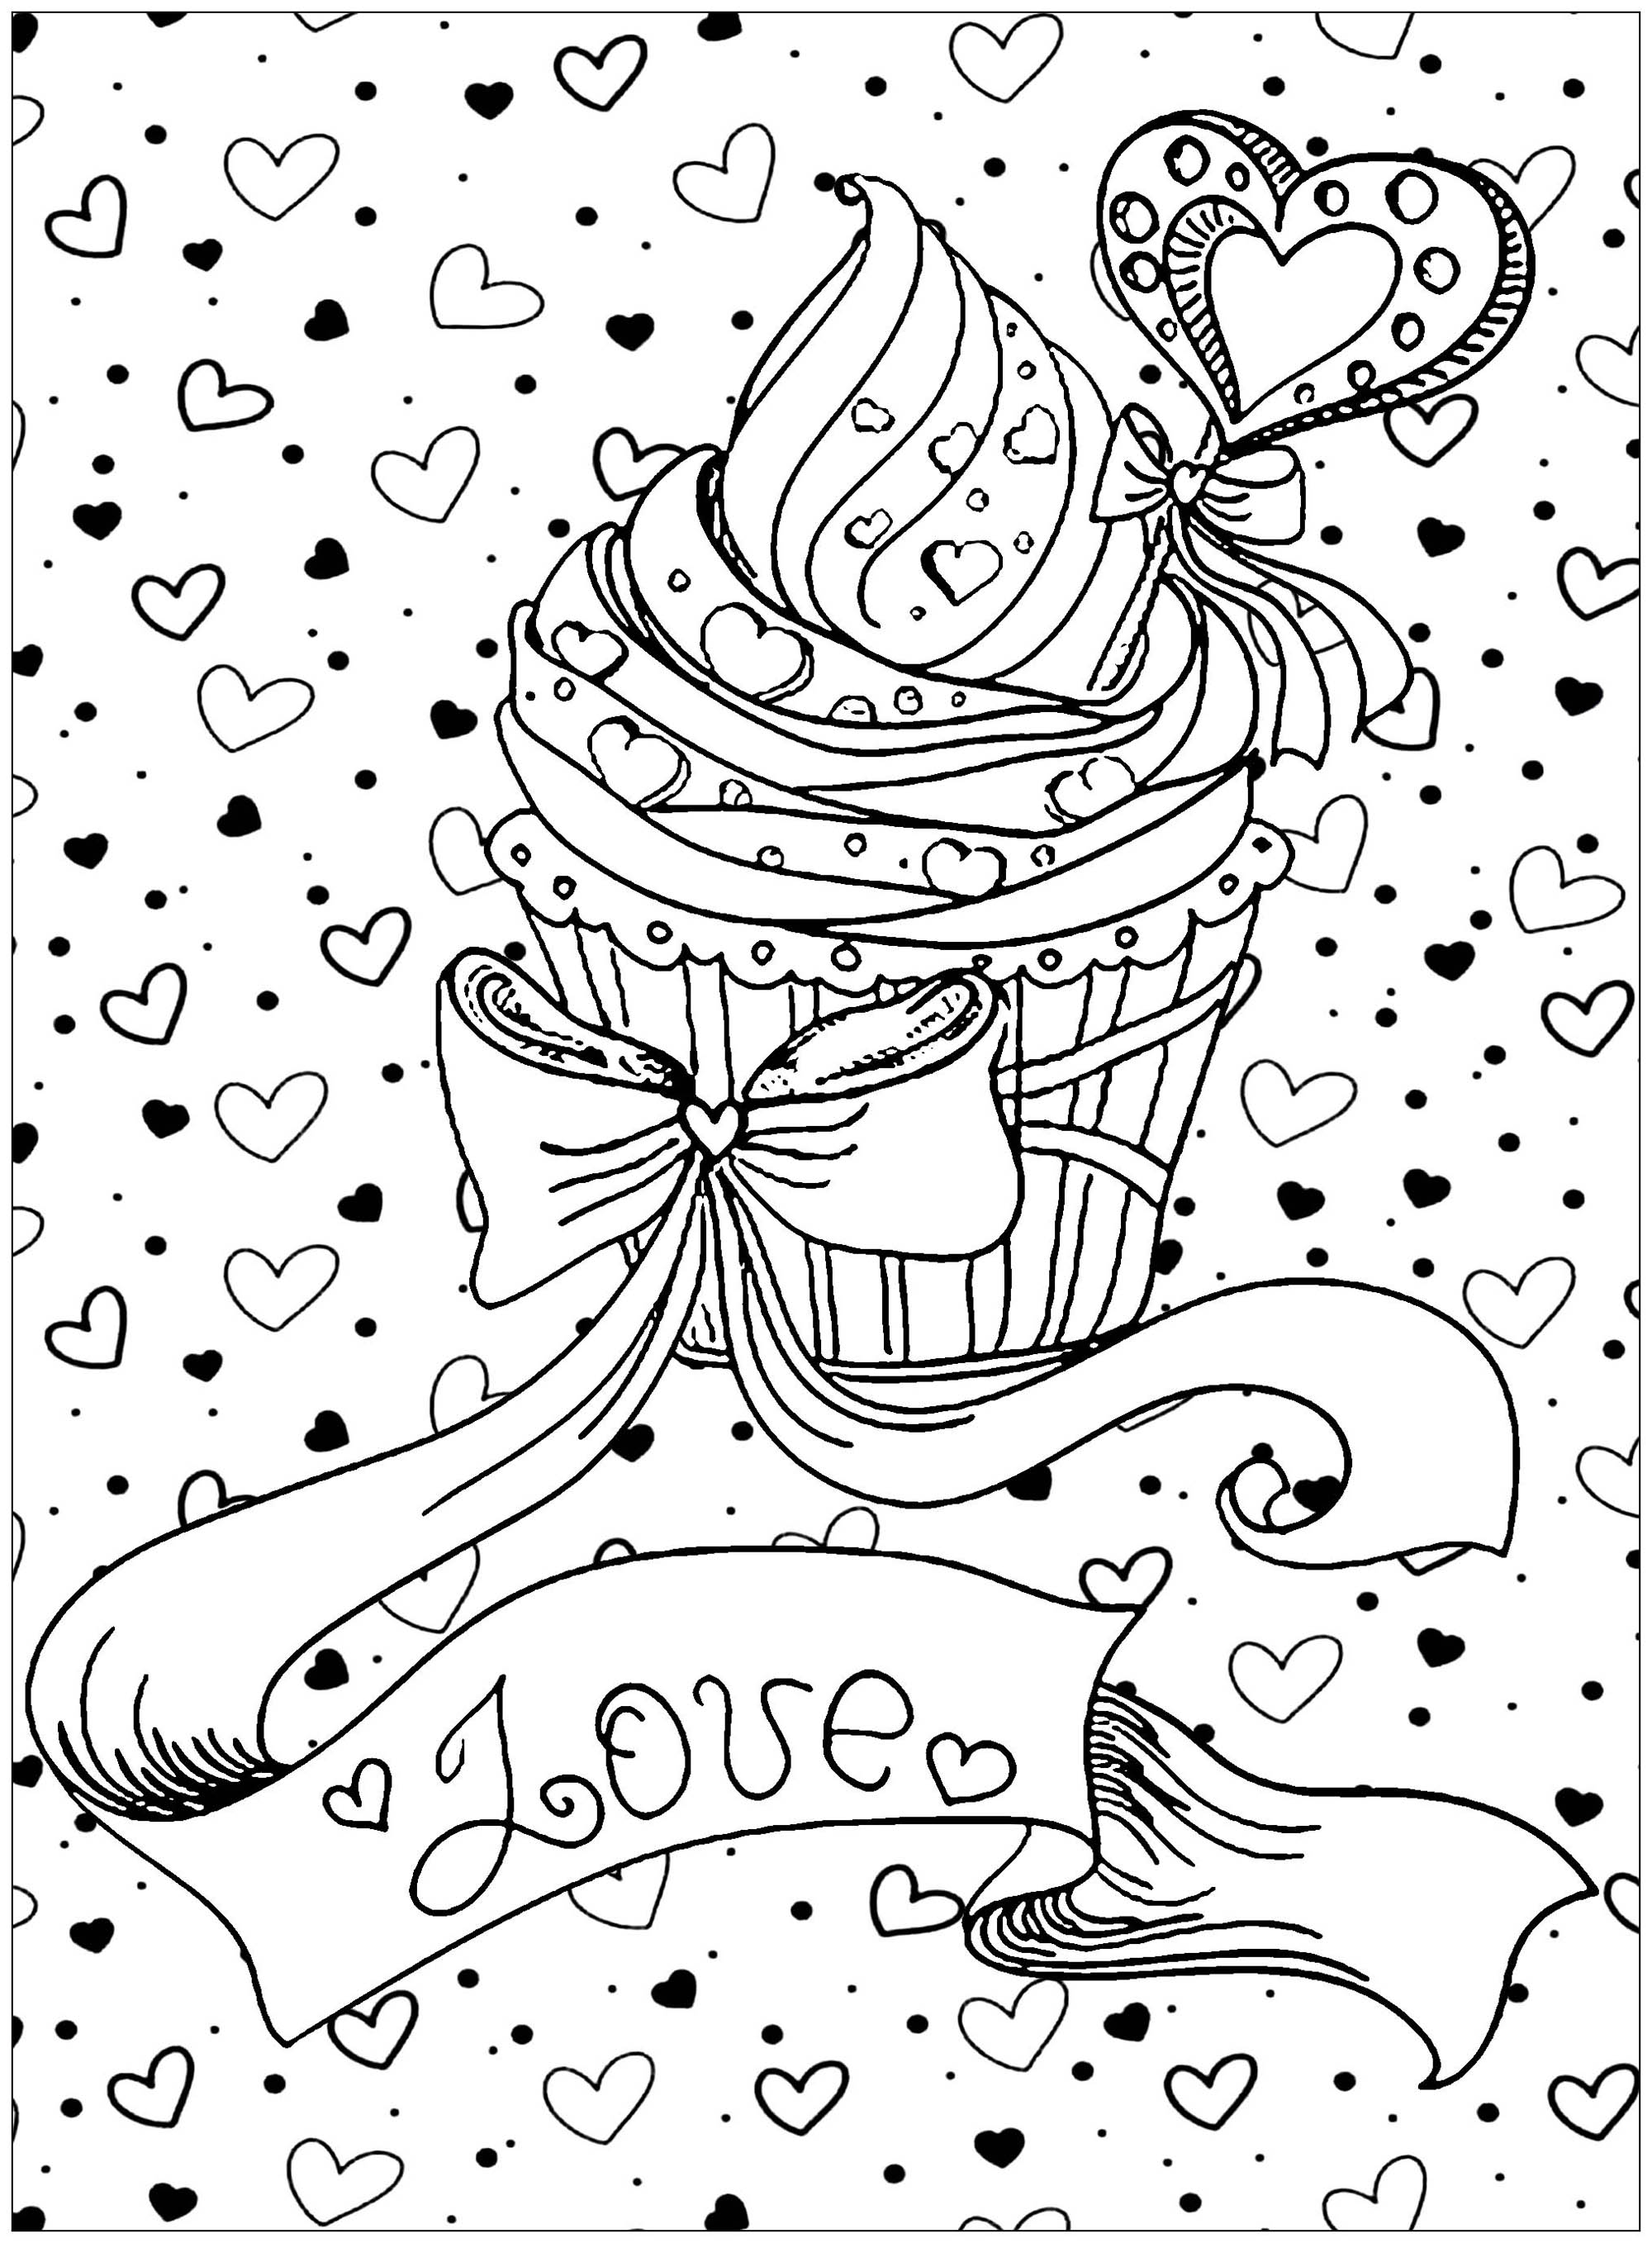 Mothers Day Coloring Pages For Adults at GetDrawings | Free download